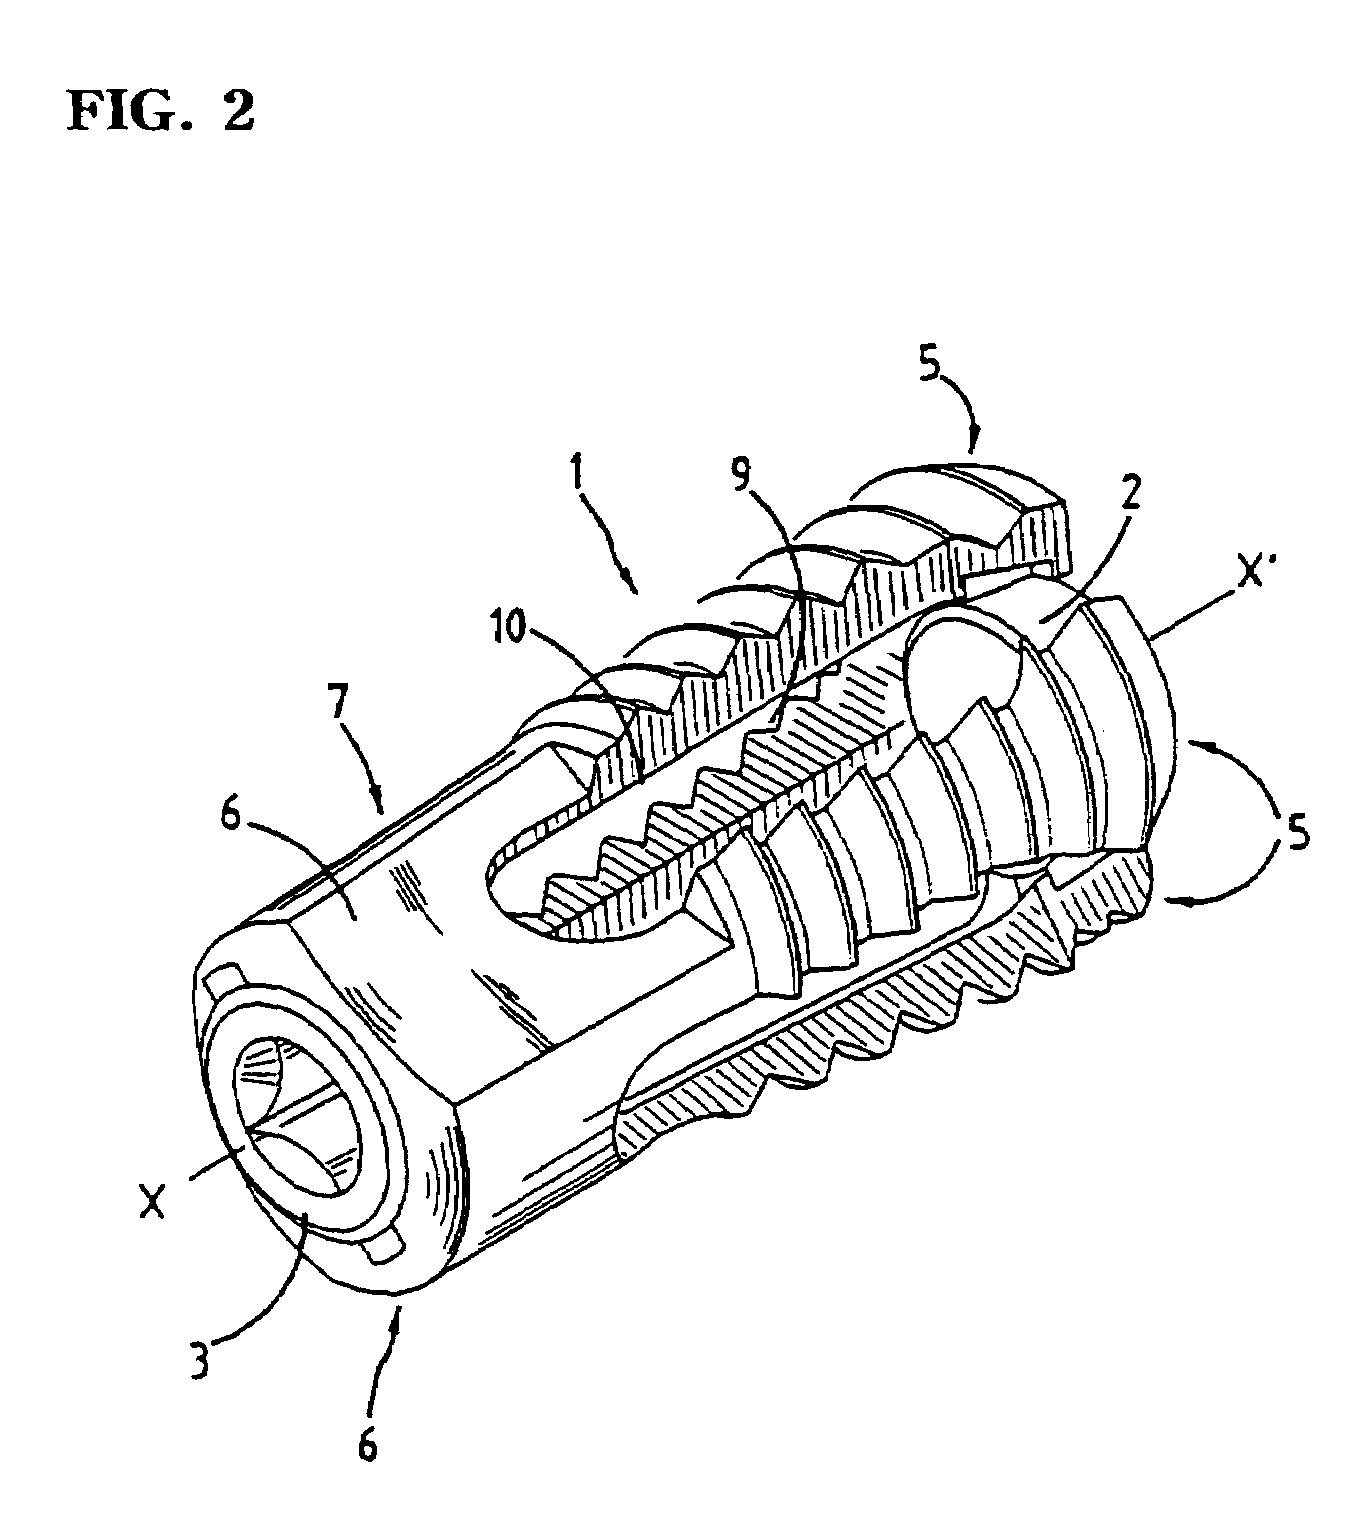 Expandable interfusion cage